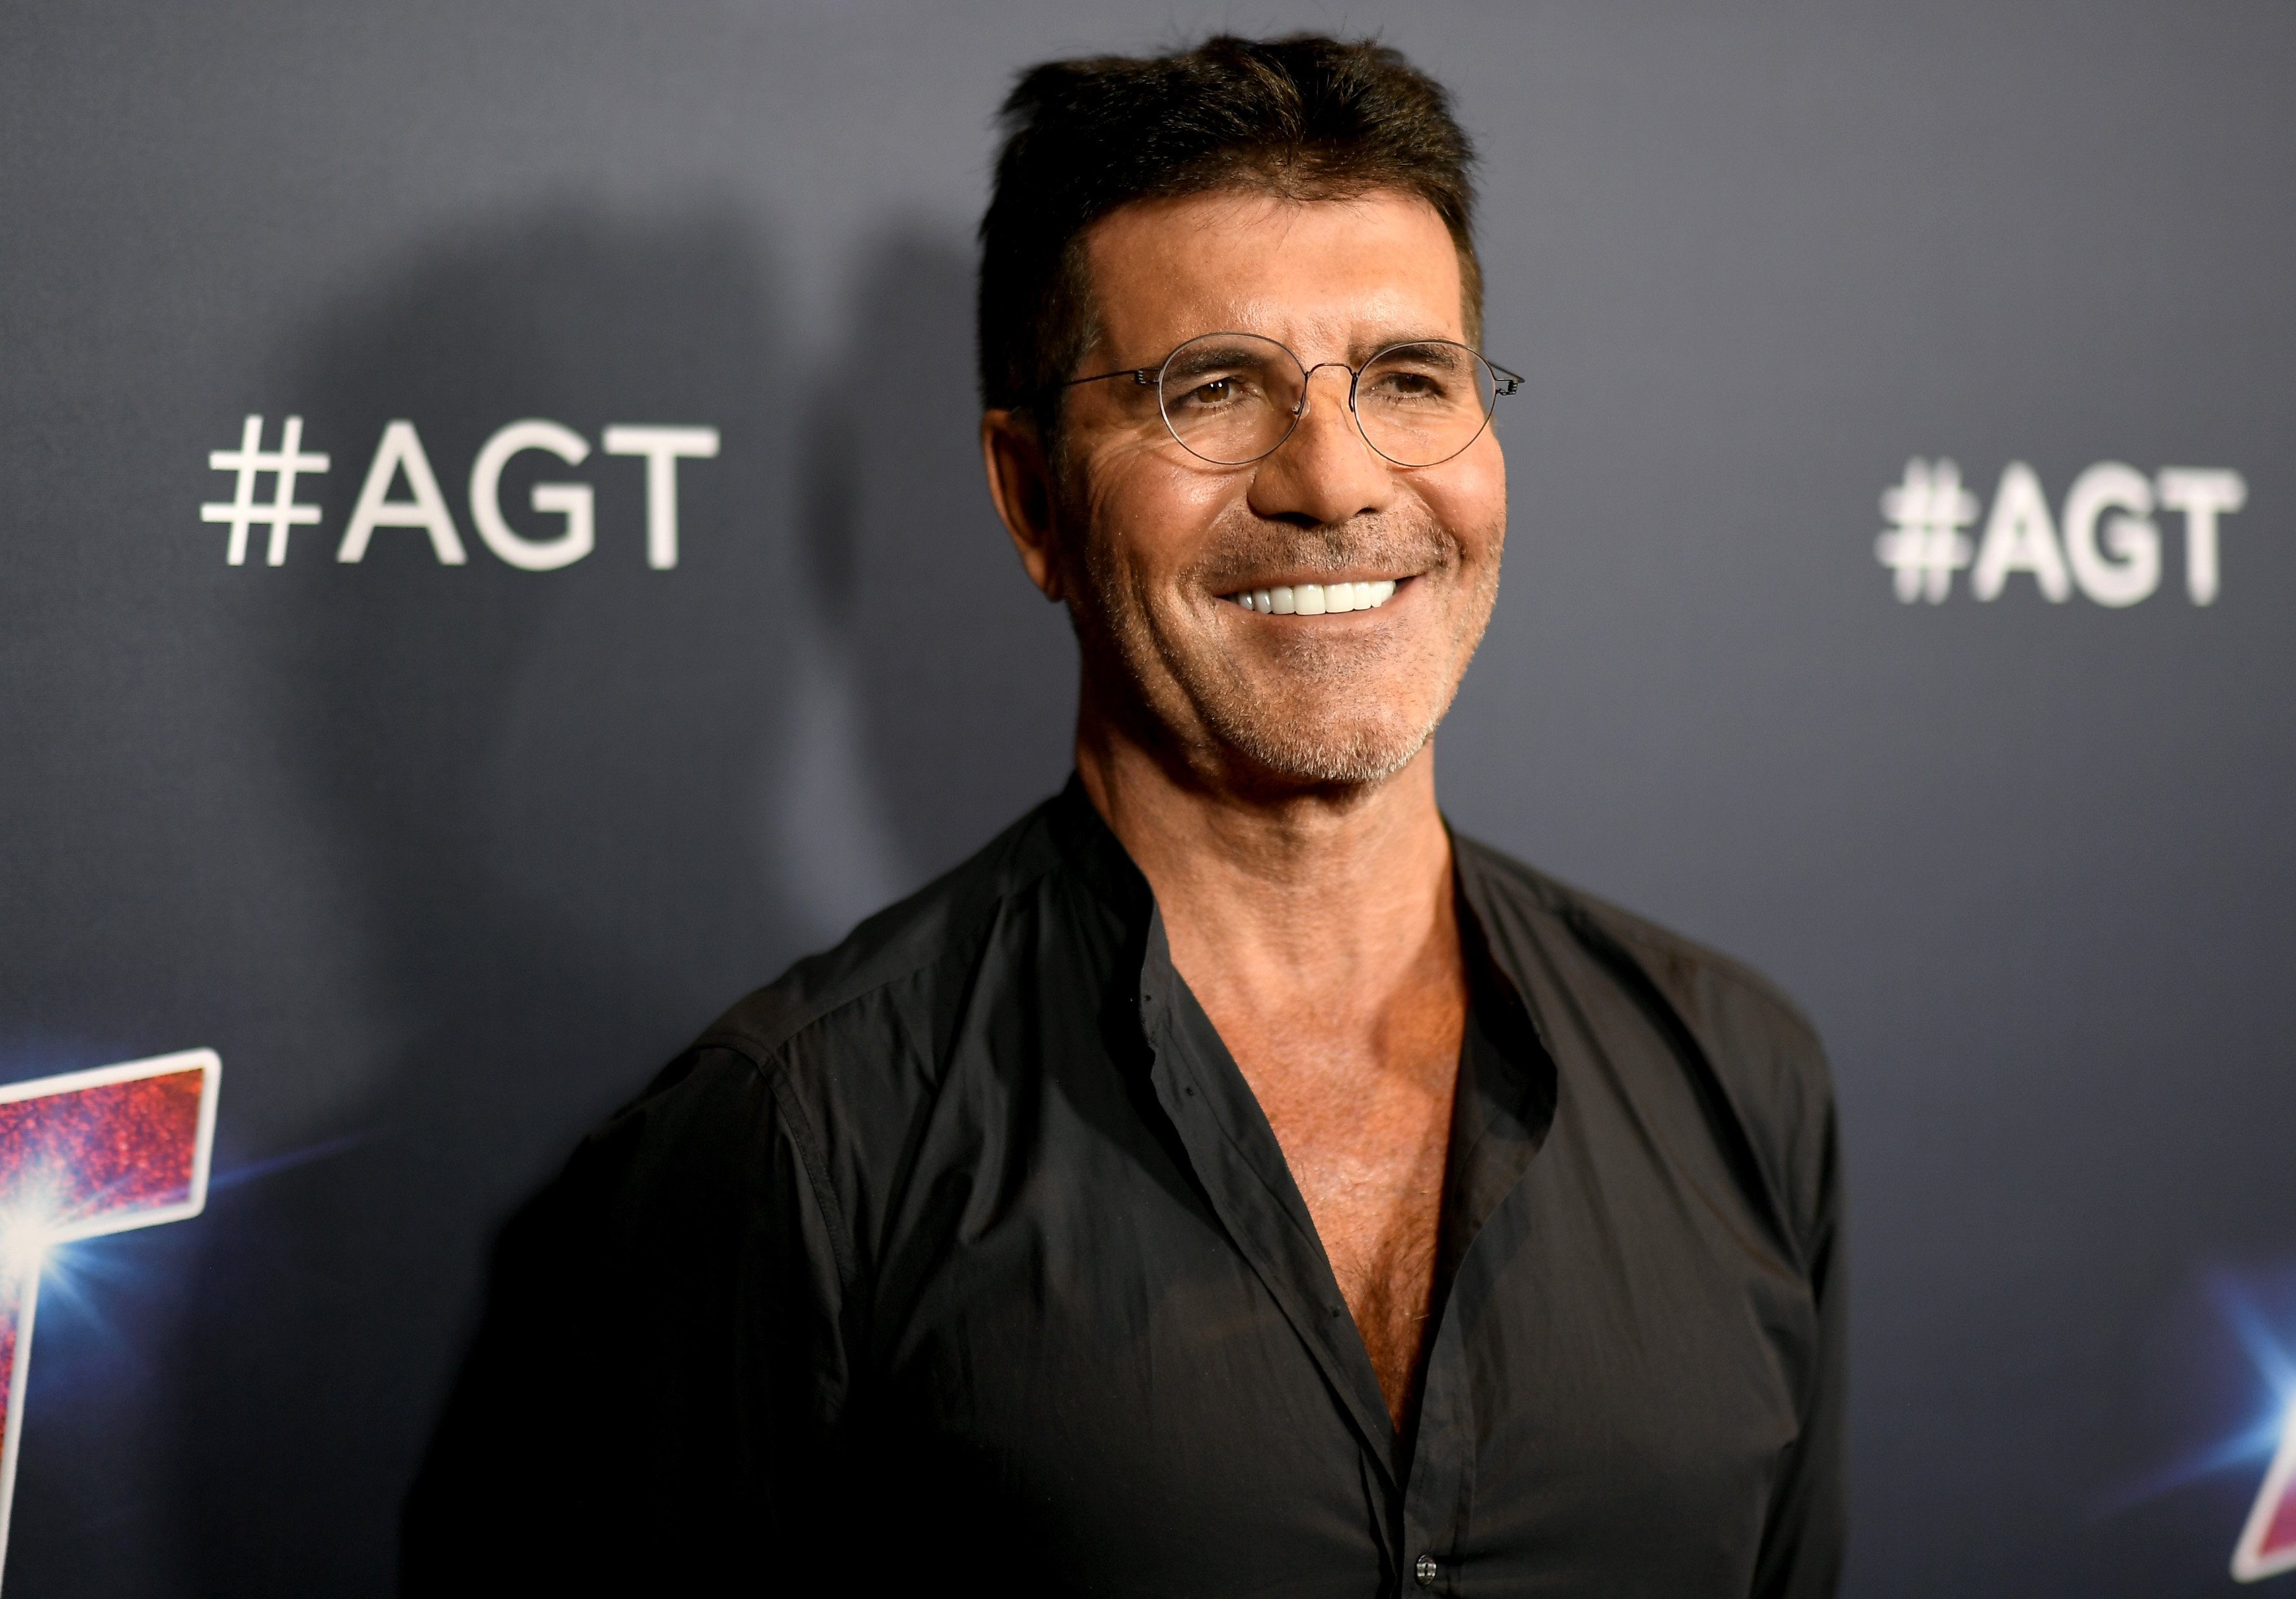 Simon Cowell attends "America's Got Talent" Season 14 Live Show Red Carpet at Dolby Theatre on September 17, 2019 in Hollywood, California | Source: Getty Images 